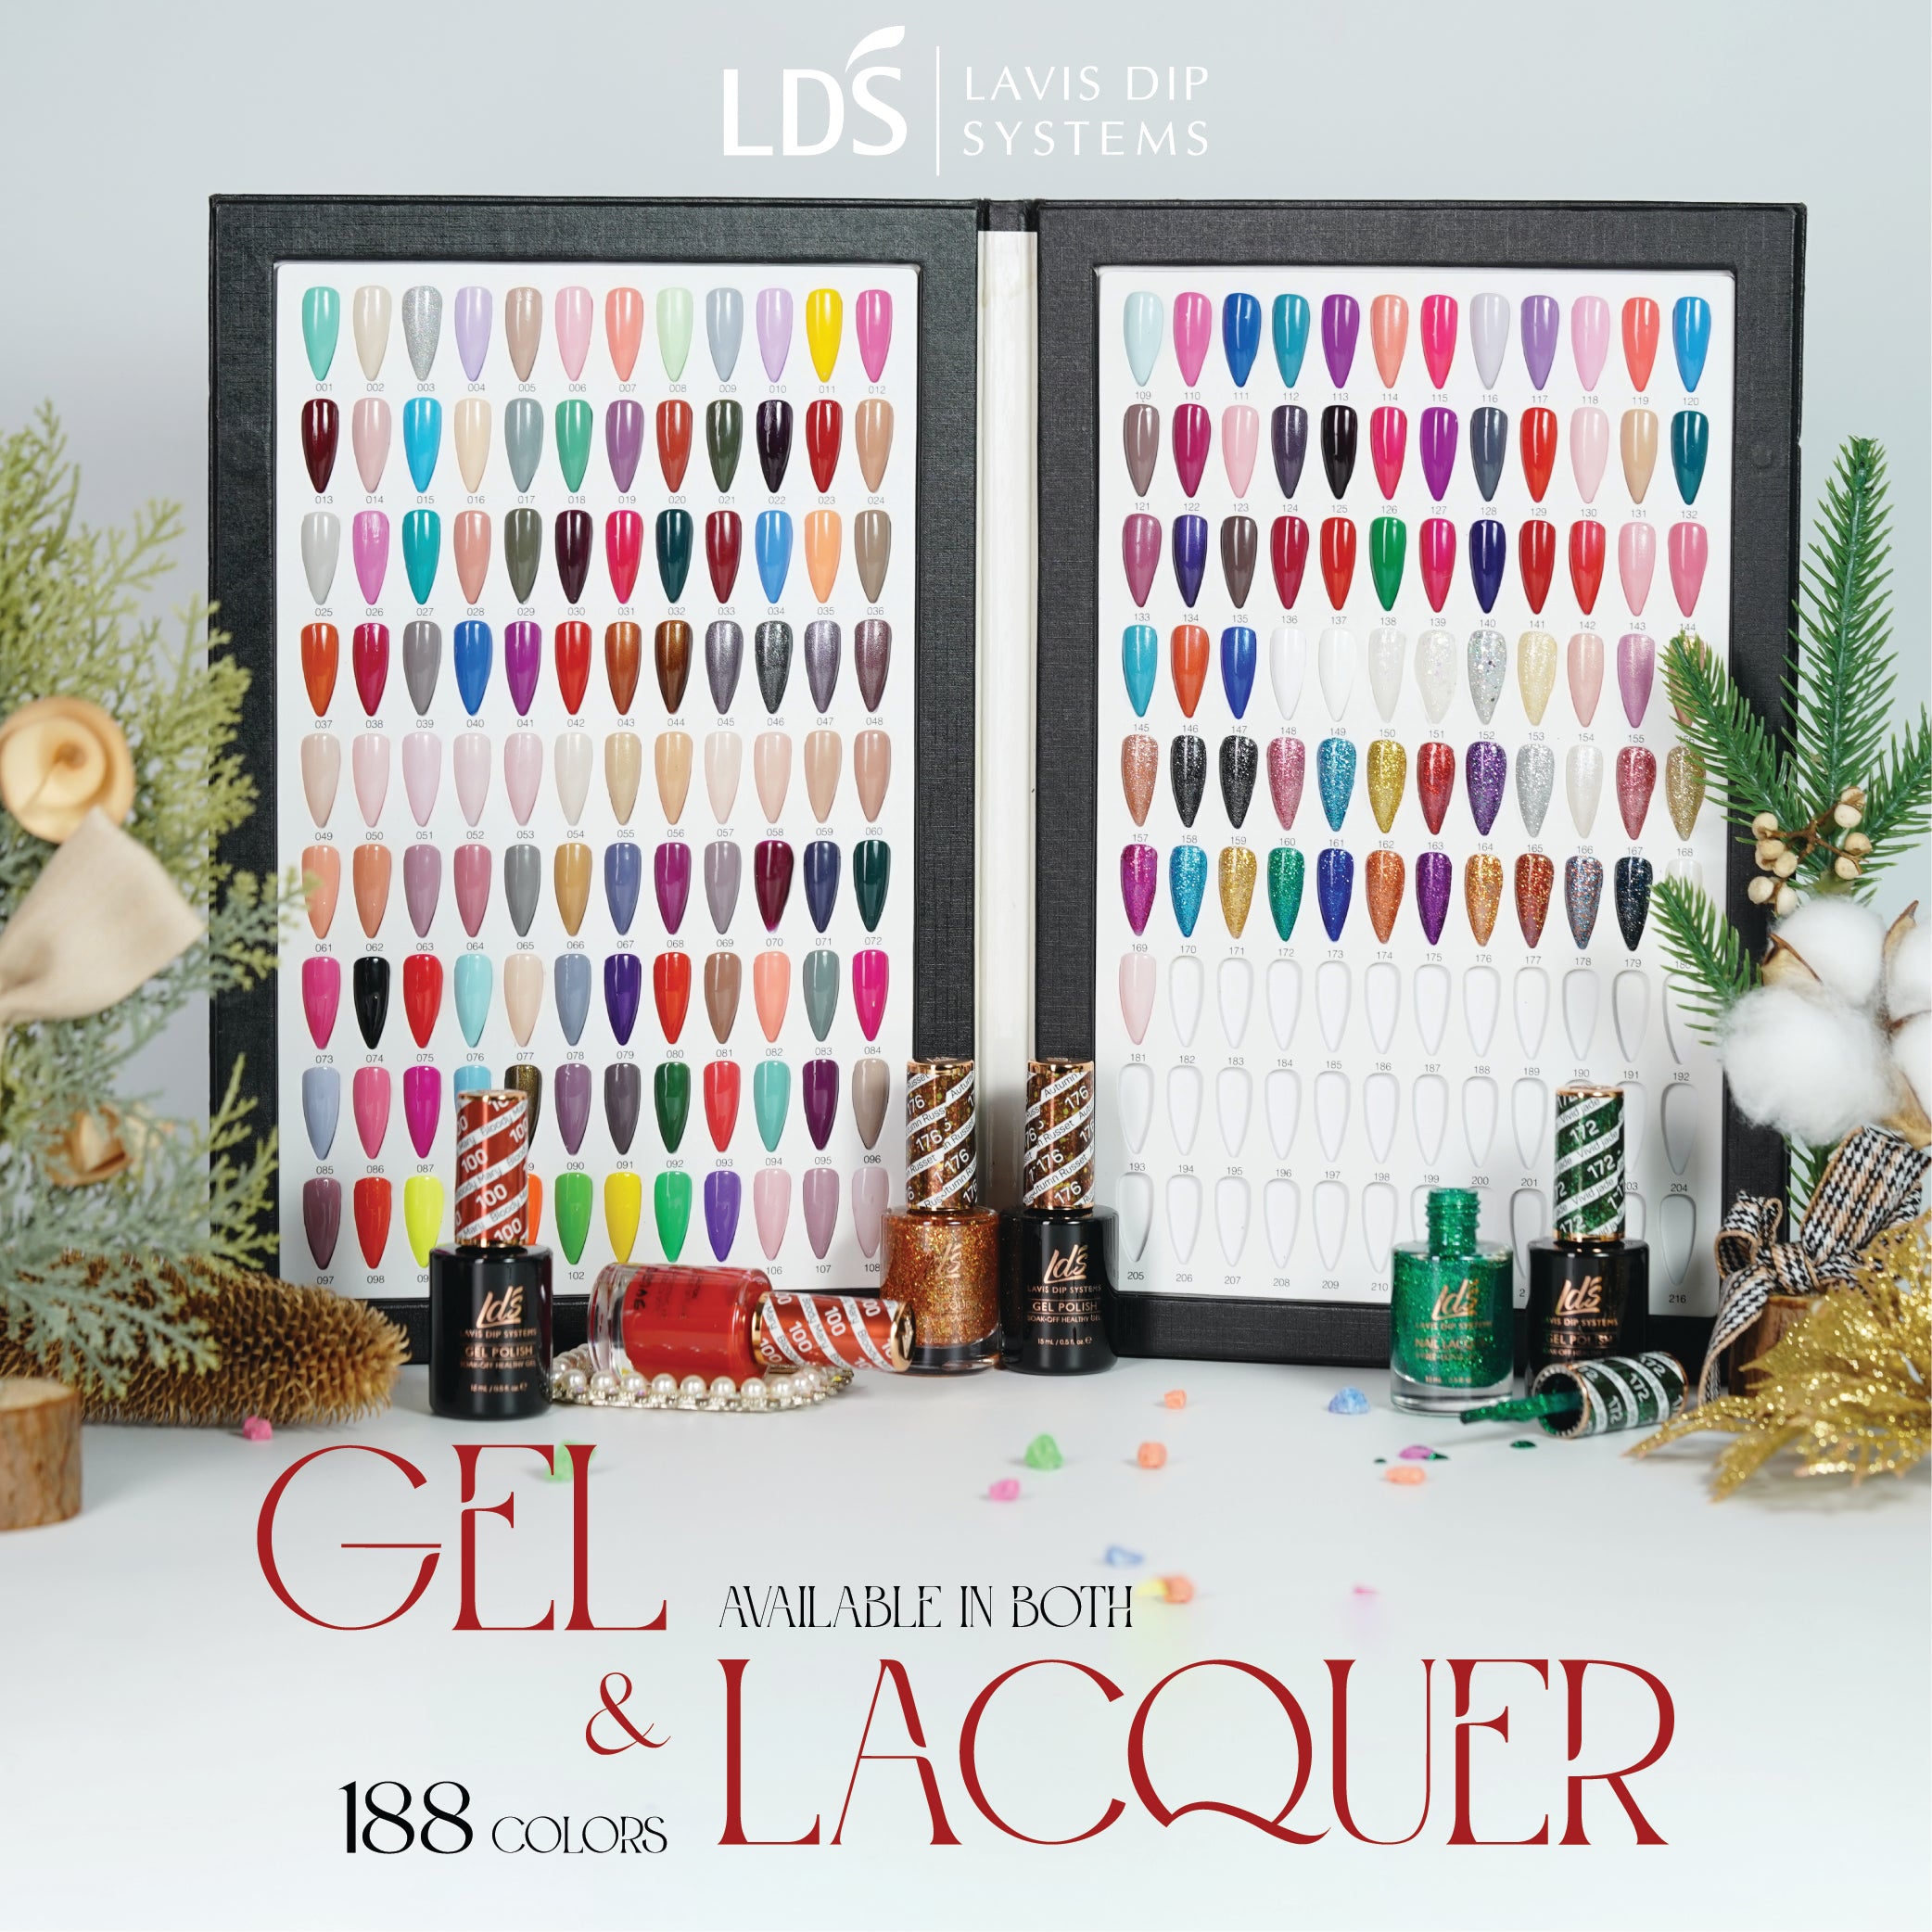 LDS 104 Wanderlust - LDS Healthy Gel Polish & Matching Nail Lacquer Duo Set - 0.5oz